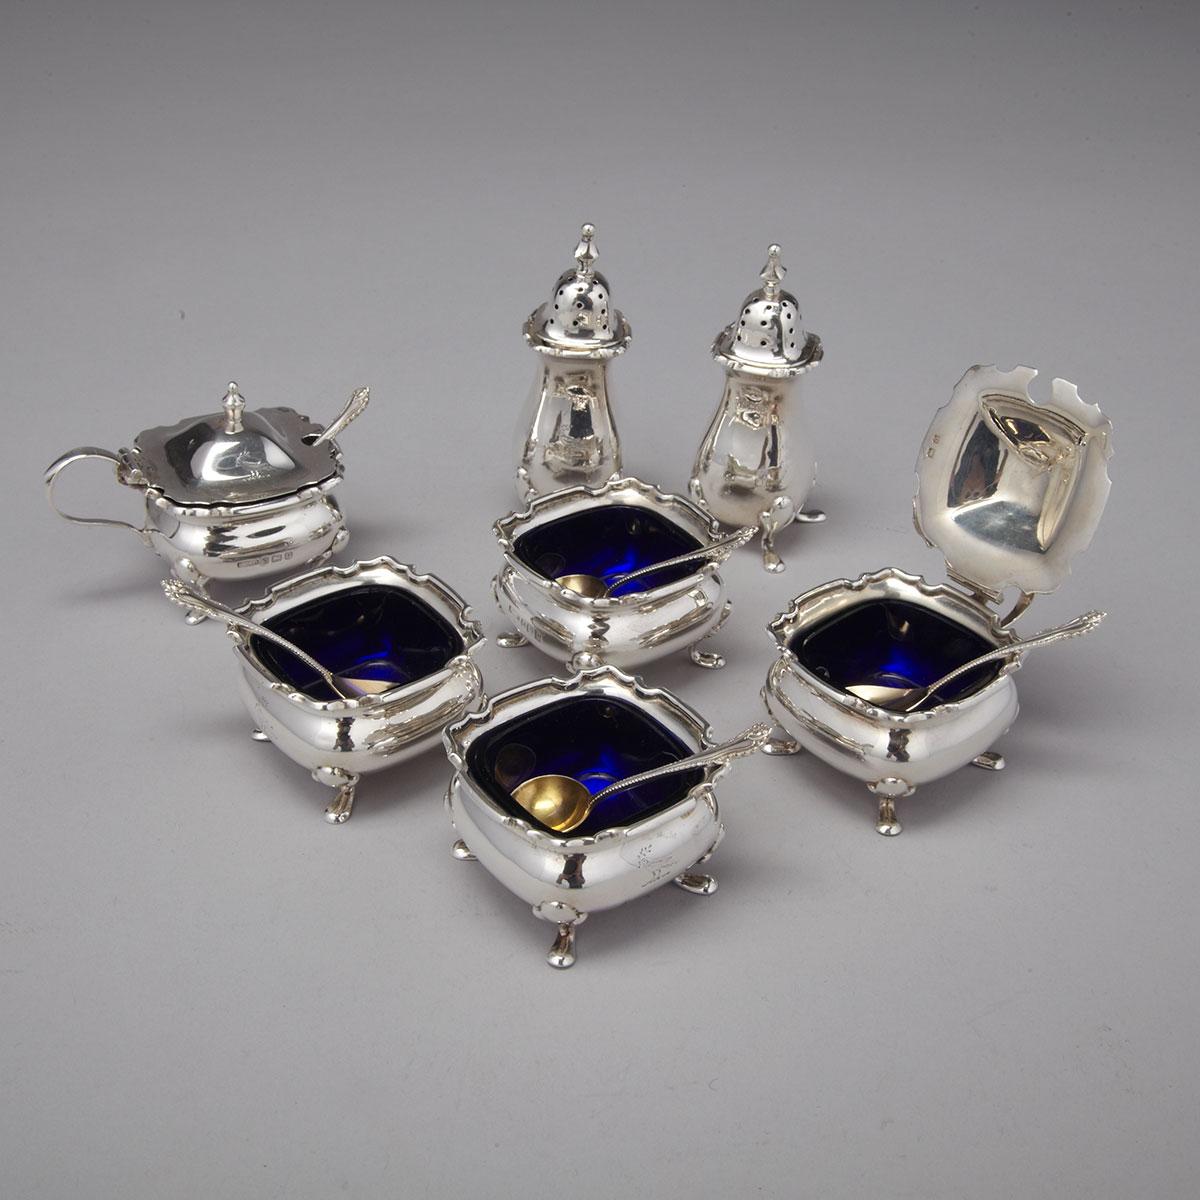 English Silver Condiment Set, E.S. Barnsley & Co. and H.V. Pithey & Co., Birmingham, 1912